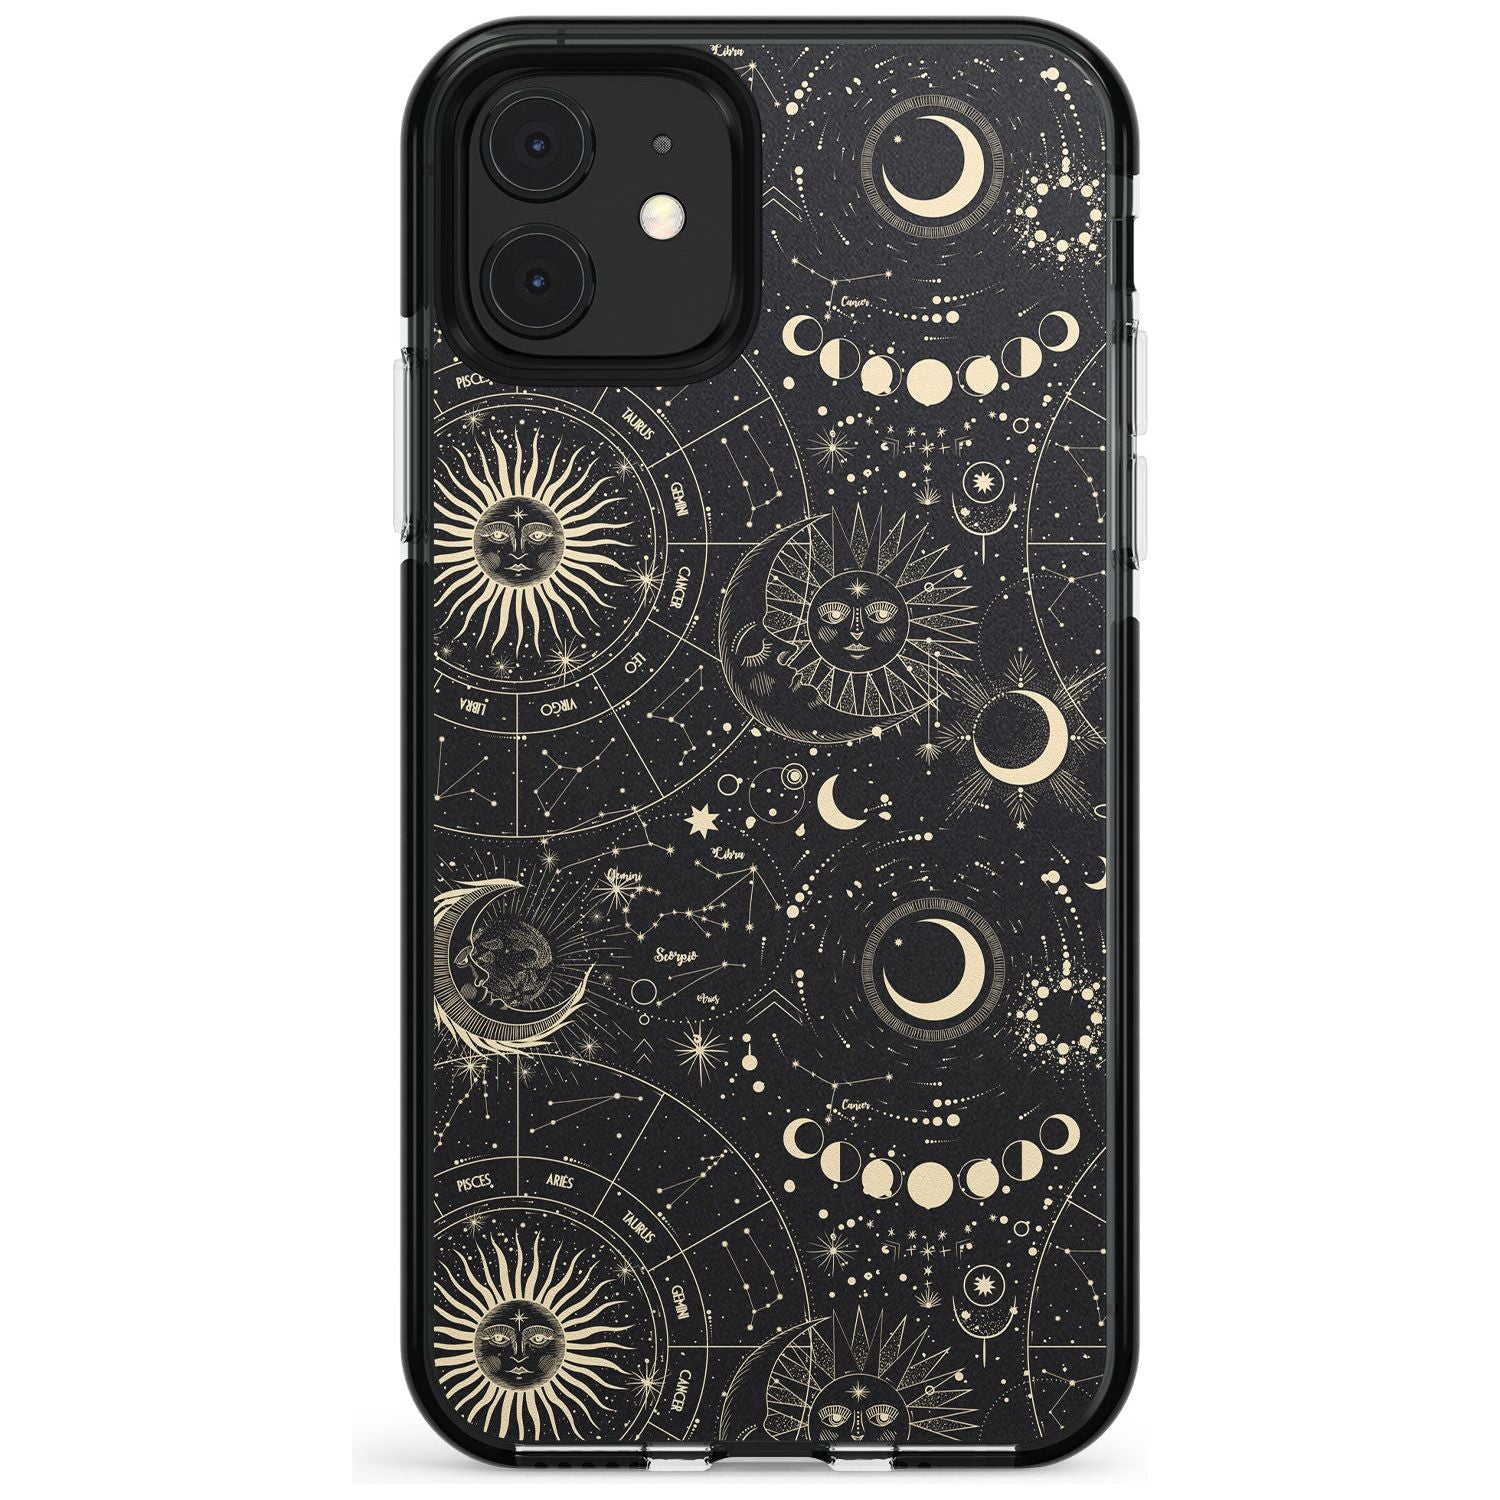 Suns, Moons & Star Signs Pink Fade Impact Phone Case for iPhone 11 Pro Max